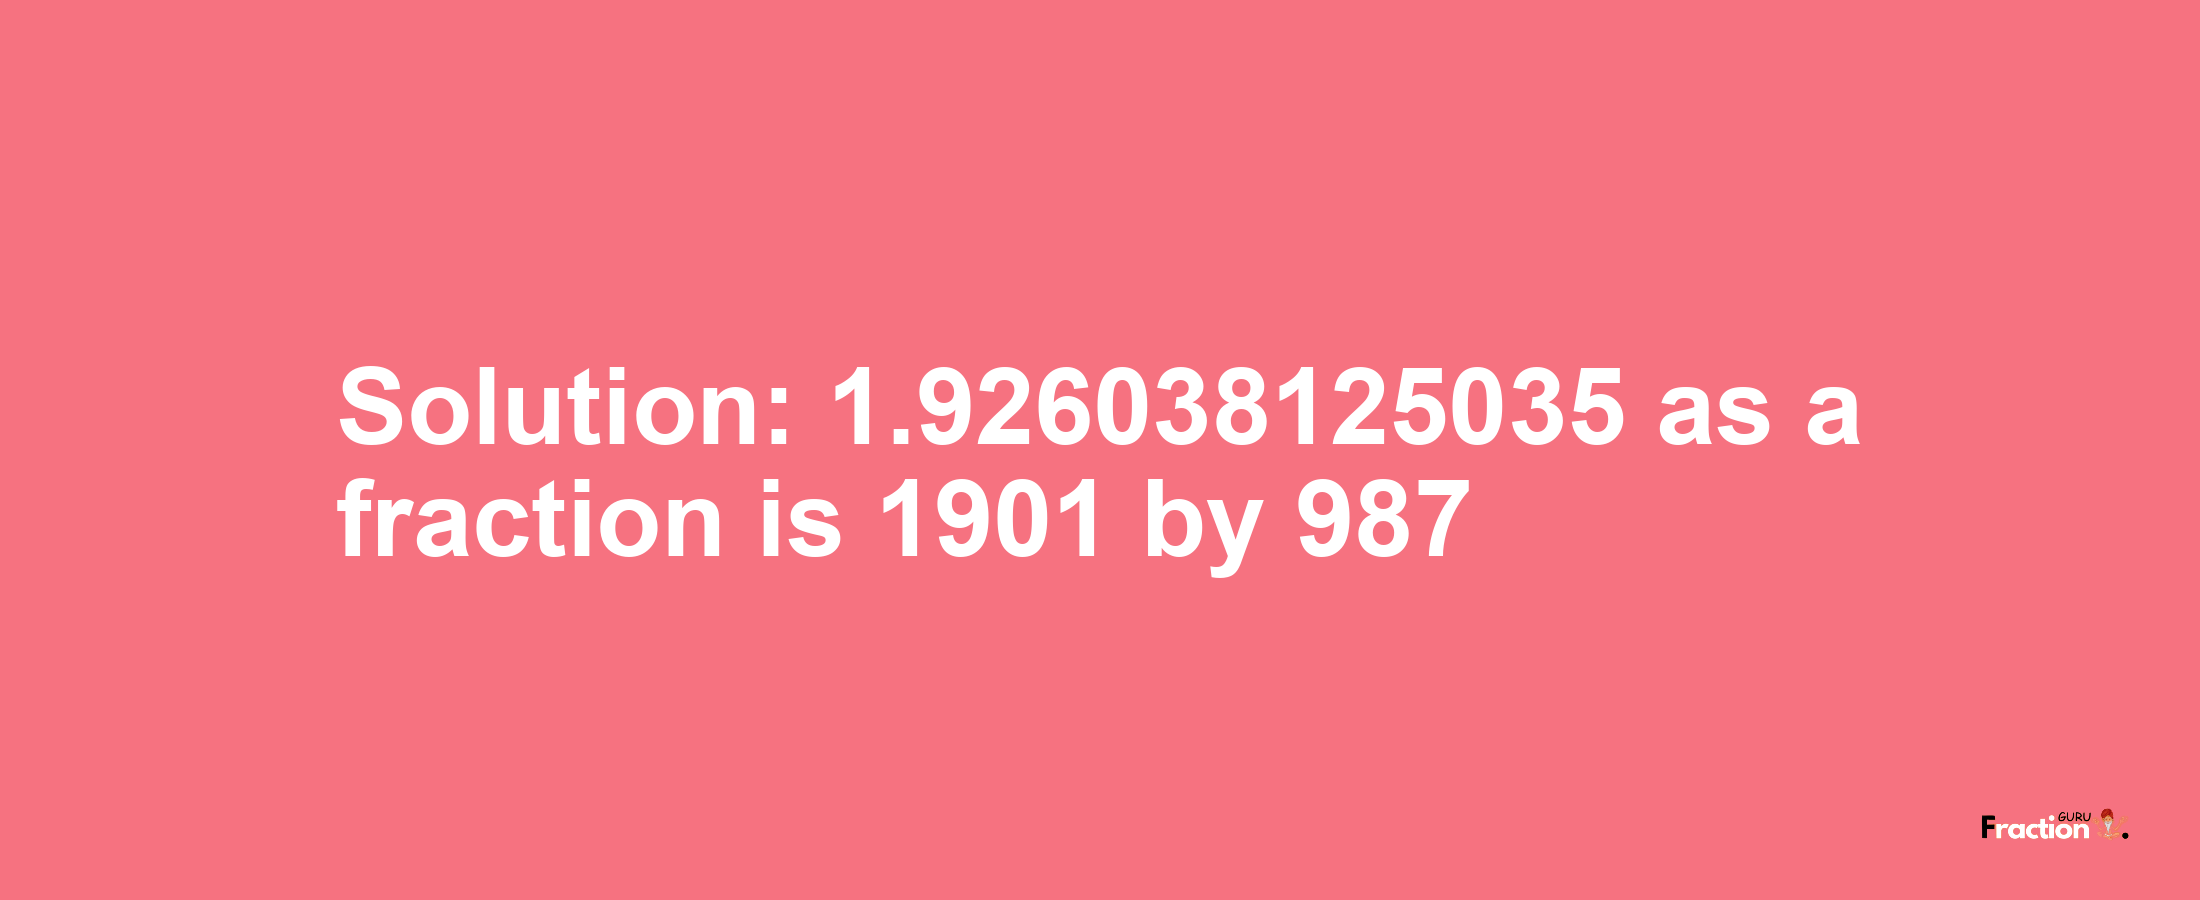 Solution:1.926038125035 as a fraction is 1901/987